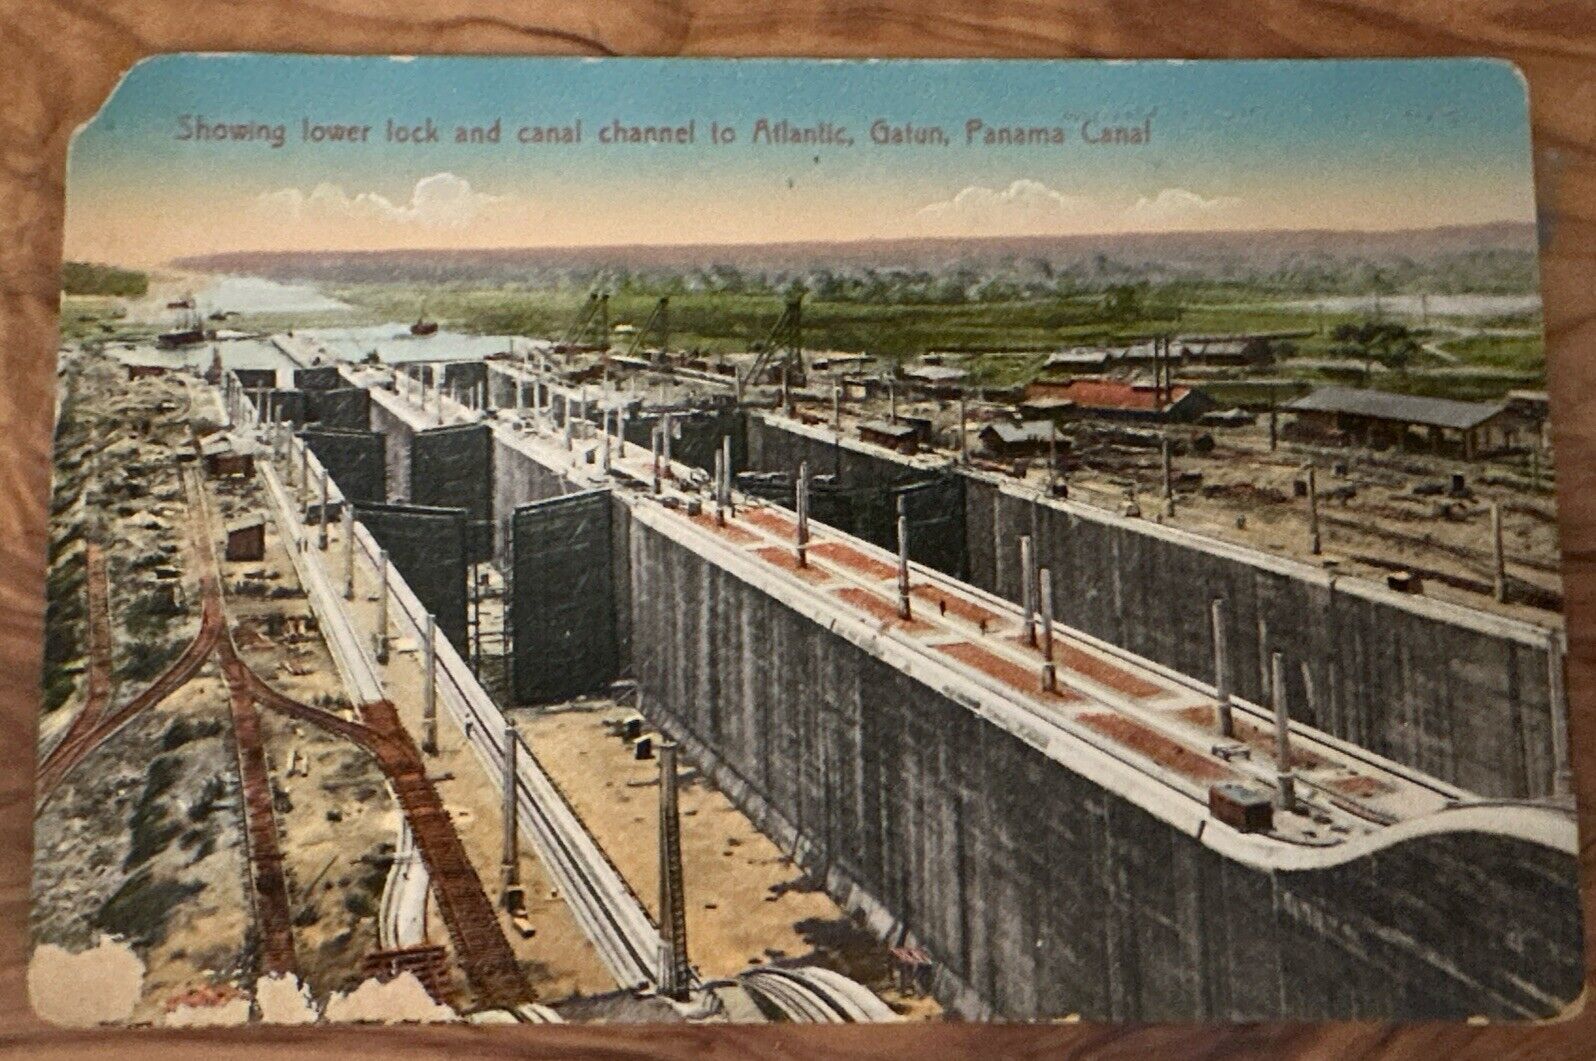 Vintage Postcard Lower Lock And Canal Channel To Atlantic Gatun Panama Canal